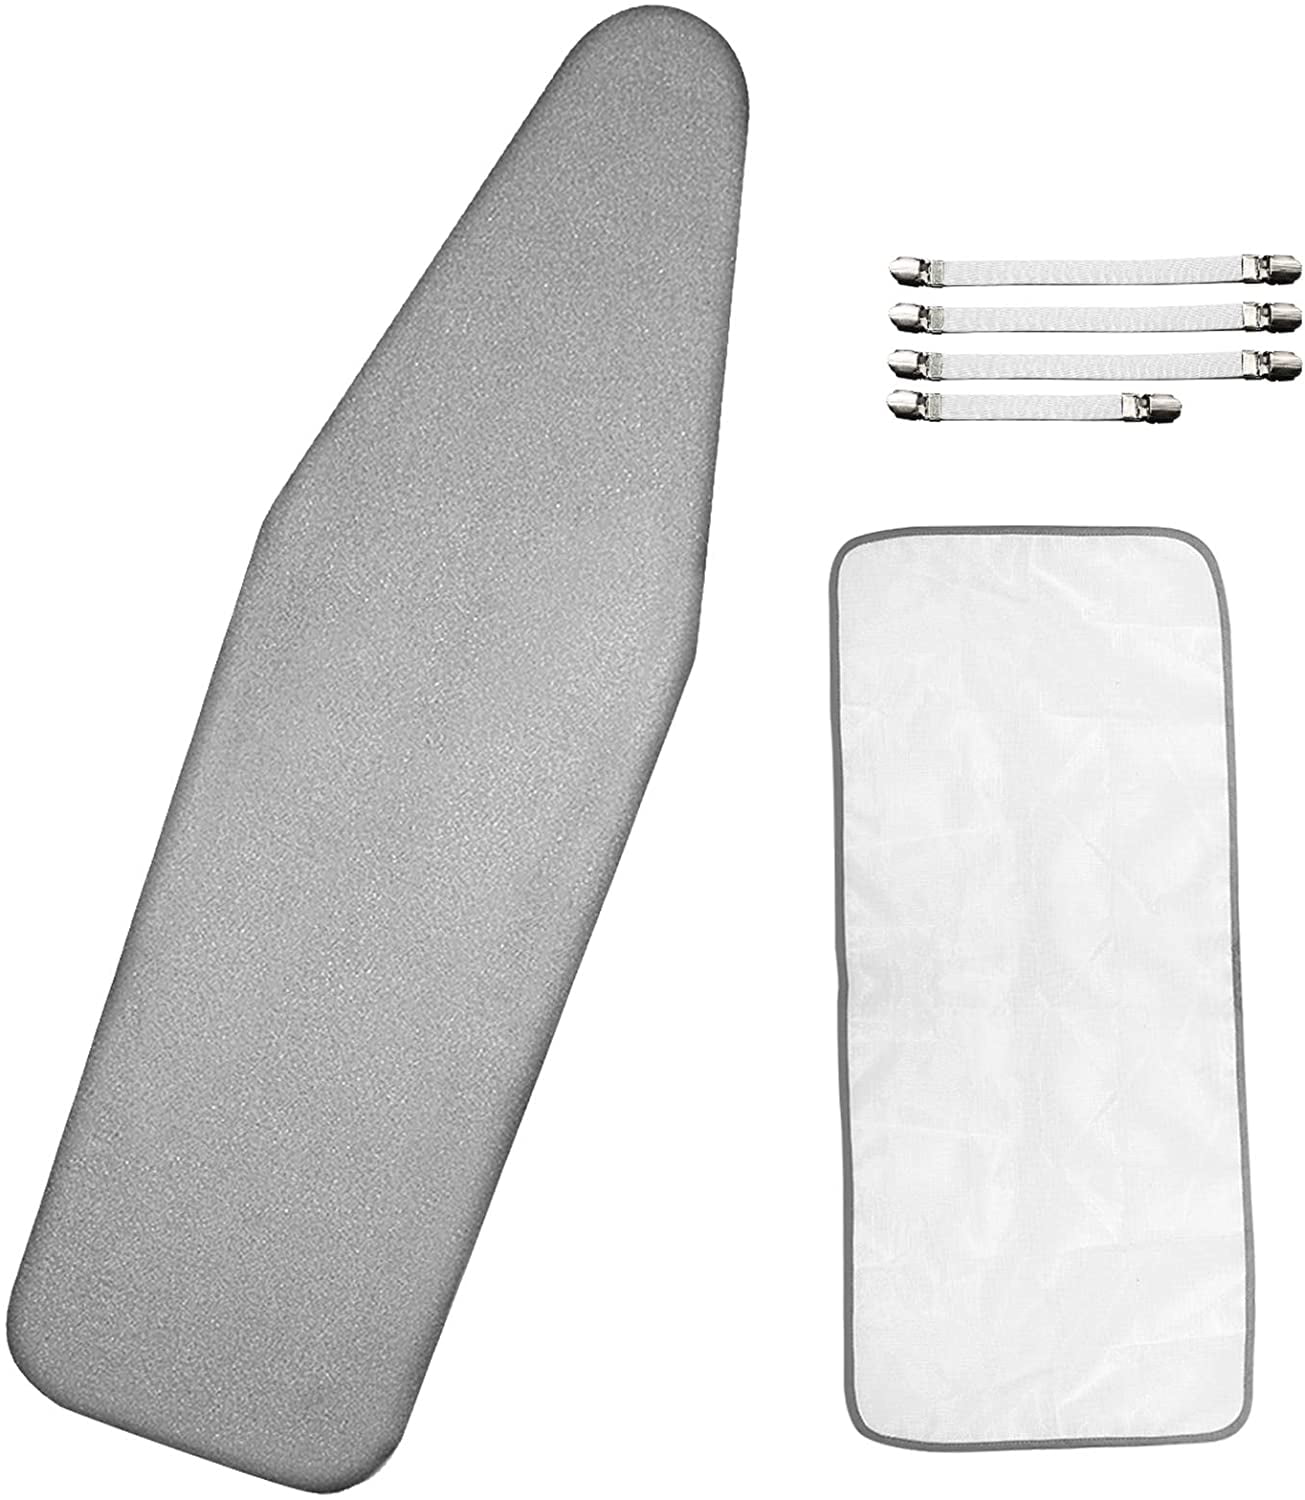 Titanium Coated with Fasteners Ironing Board Cover & Pad 18 x 49 inch 3 Layer 